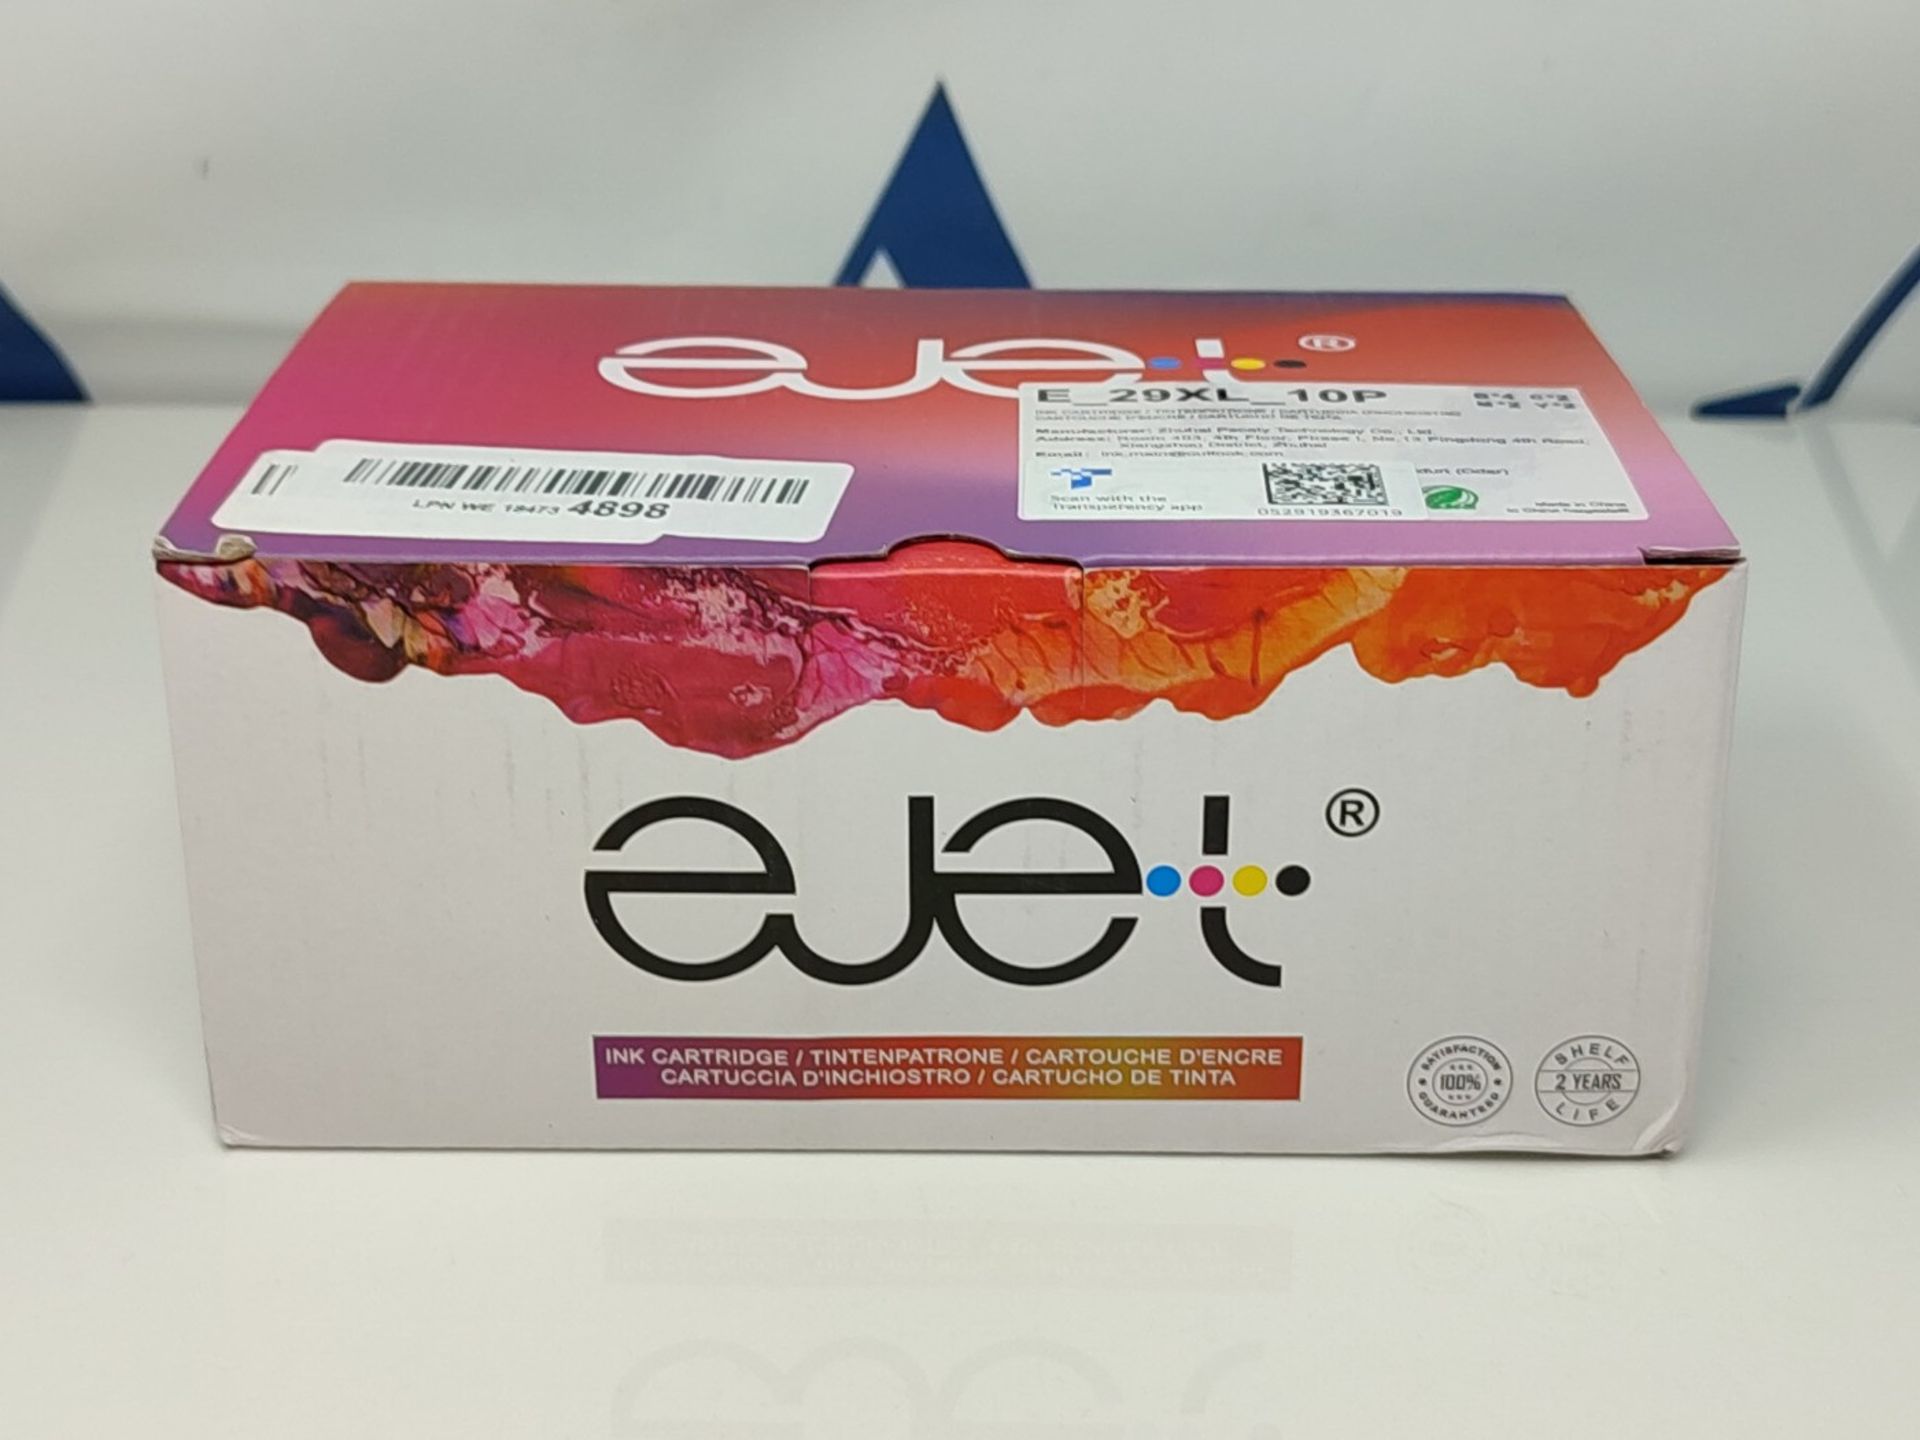 ejet XL High Yield 29XL Ink Cartridge Compatible Replacement for Epson 29 XL for XP-25 - Image 2 of 3